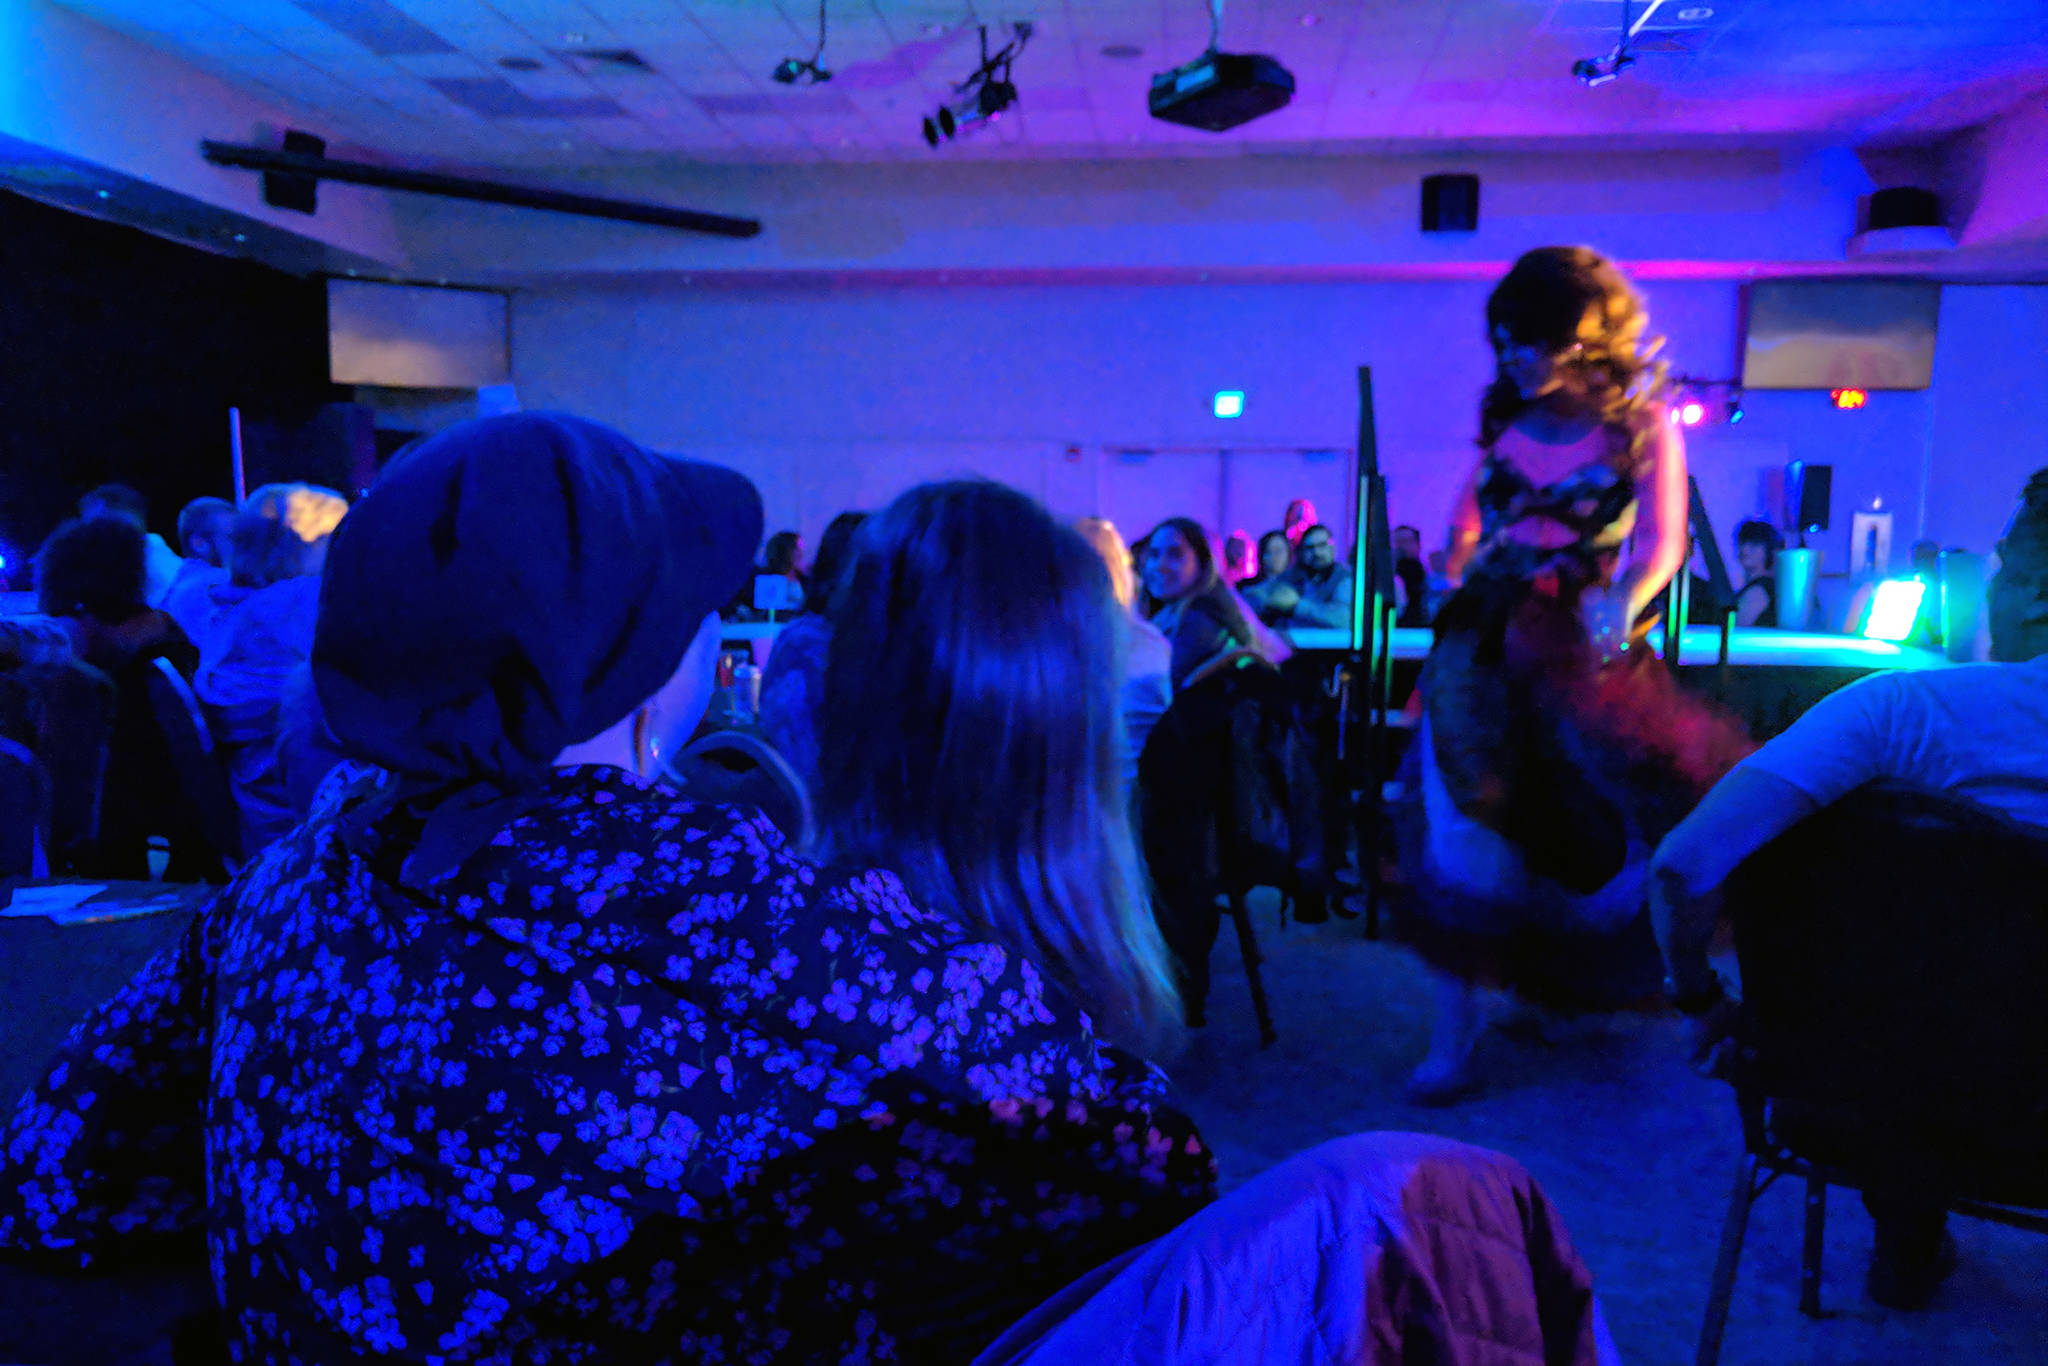 Mary Folletti Cruise and her daughter, Enza, watch drag queen Lituya Hart during the Besties 4 Breasties drag show fundraiser that benefitted Folletti Cruise, who has been diagnosed with Stage 3 breast cancer. In a few weeks, she will travel to Seattle for treatment. (Ben Hohenstatt | Capital City Weekly)